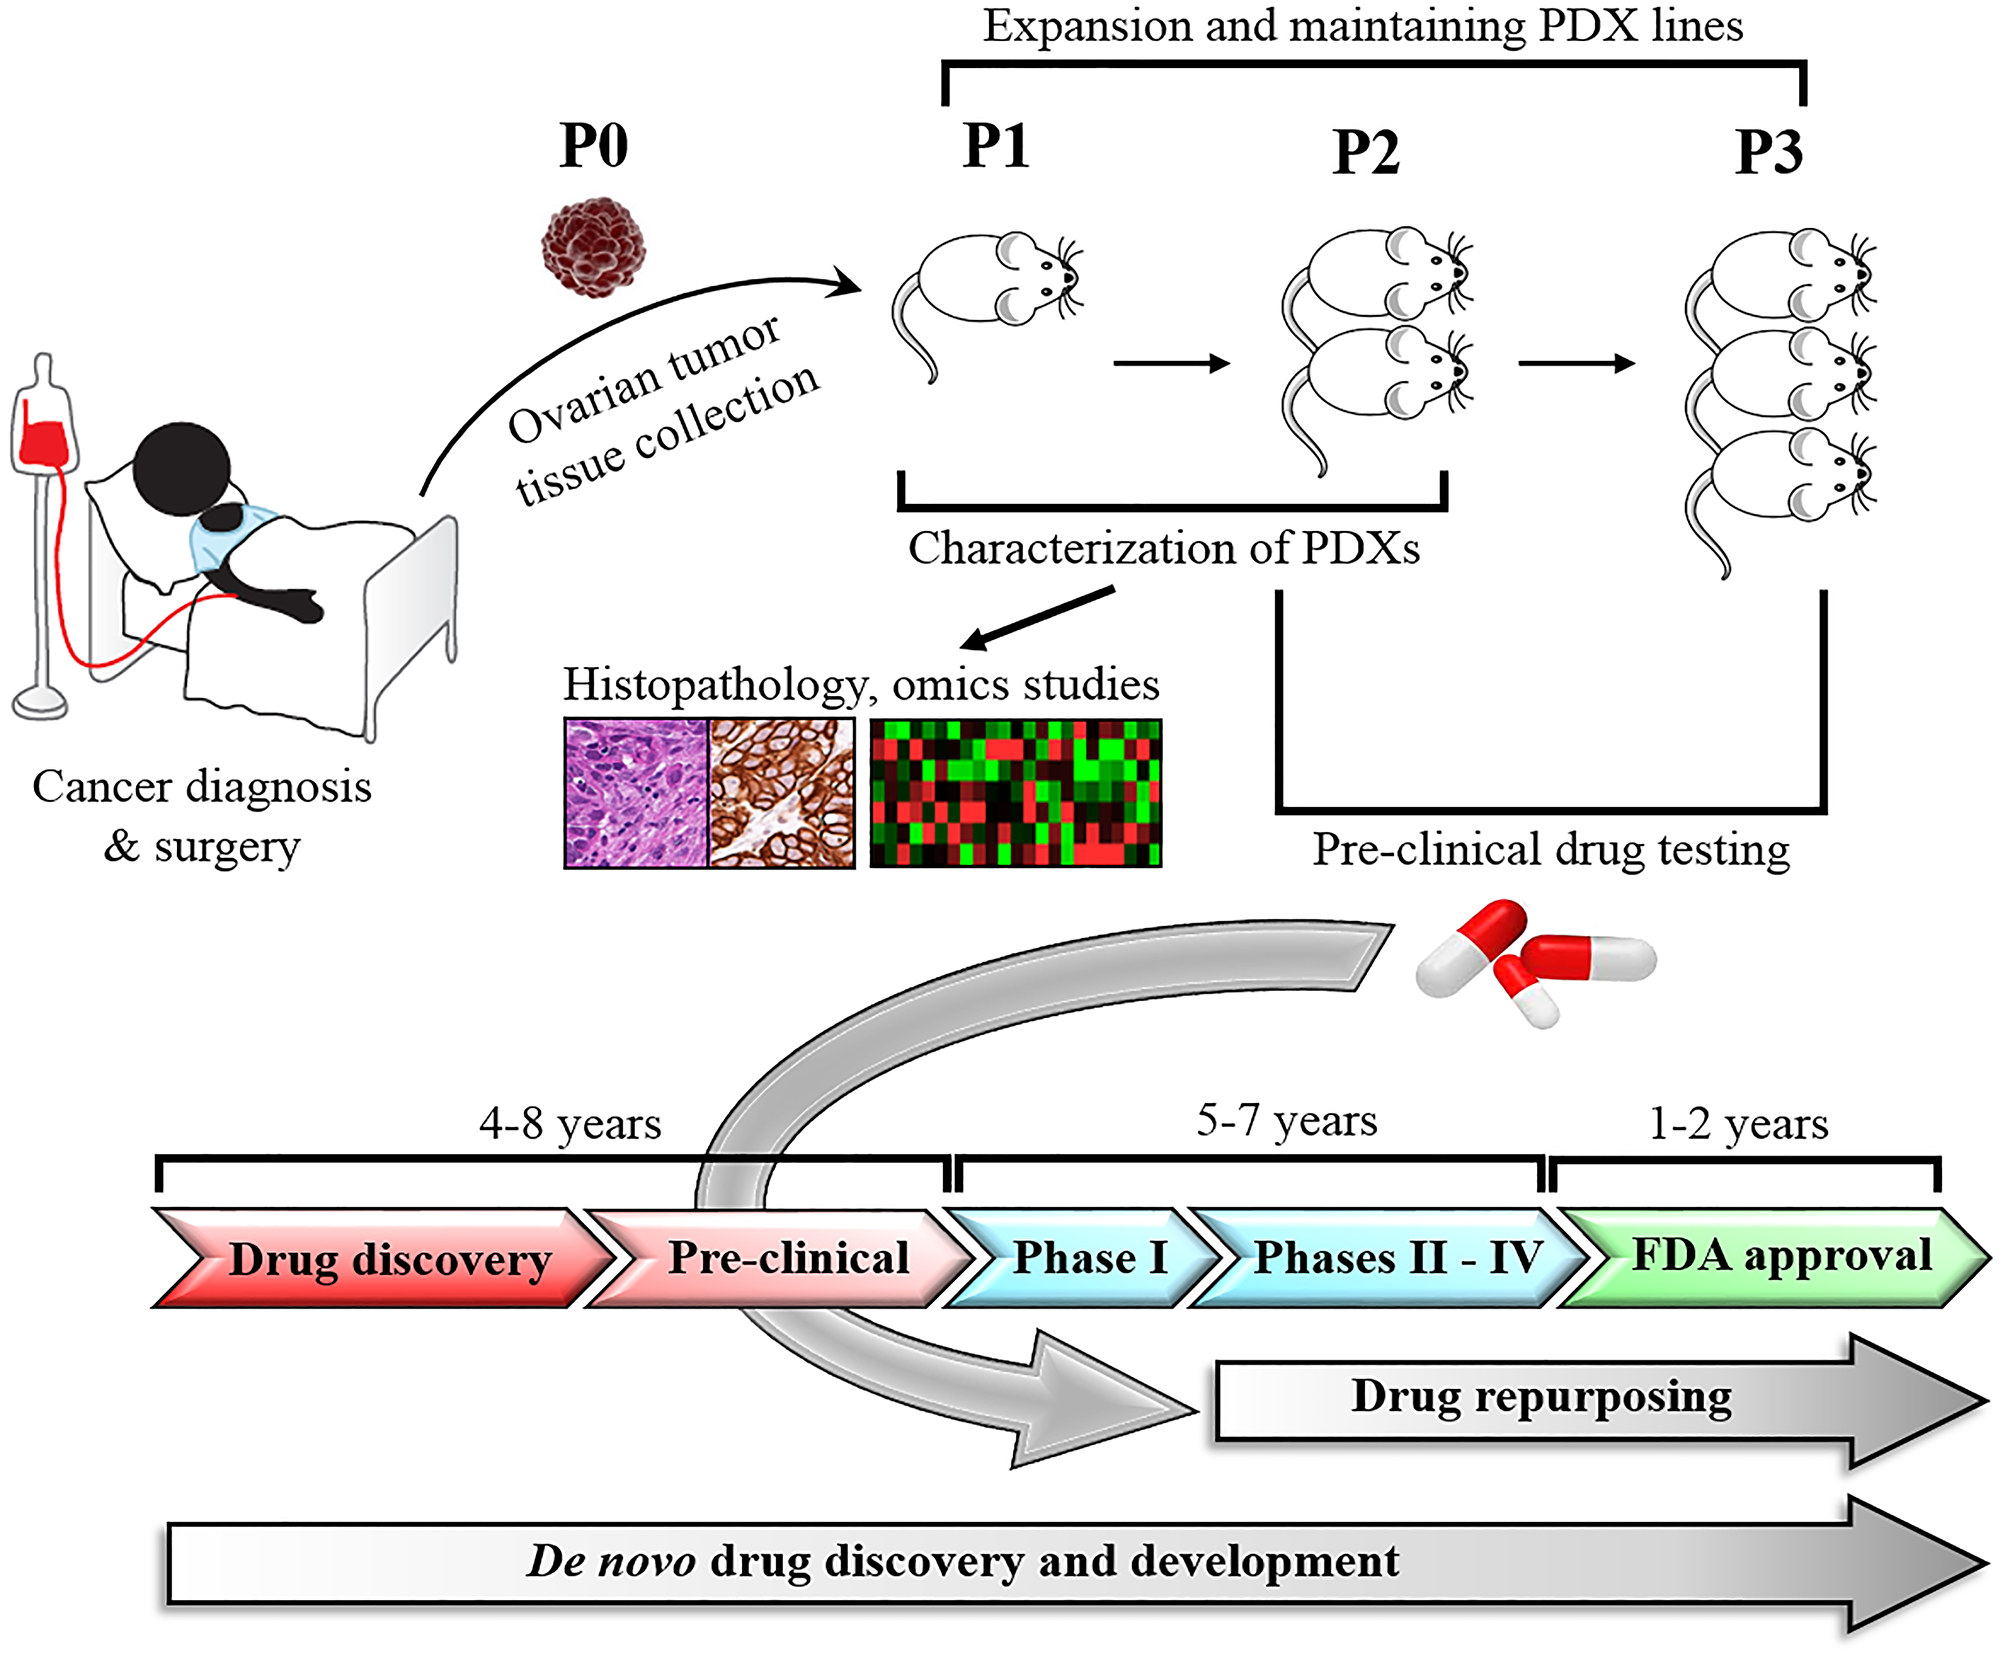 Development and application of PDX models in drug repurposing.